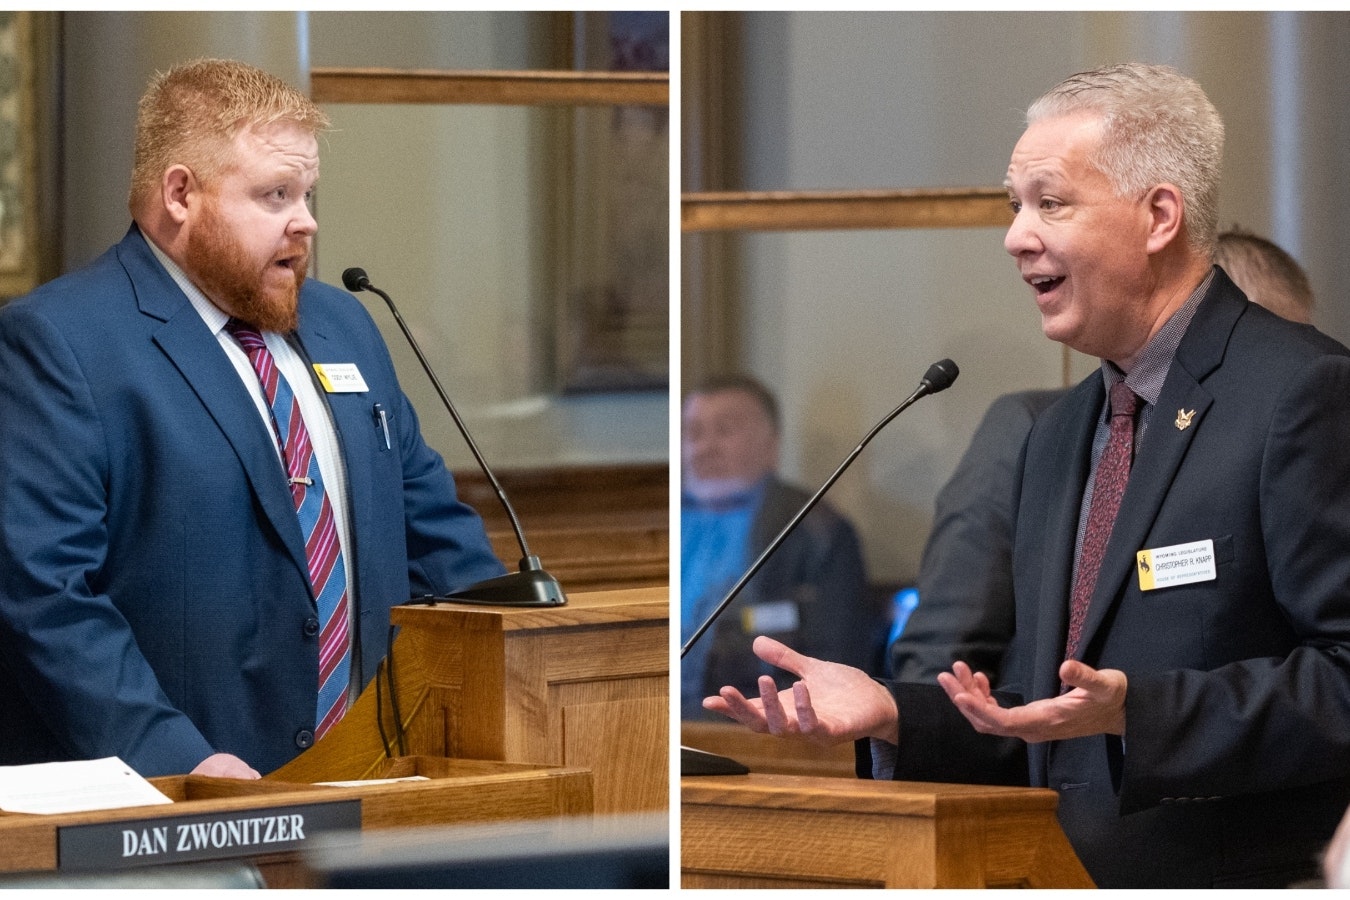 State Reps. Cody Wylie, R-Rock Springs, and Christopher Knapp, R-Gillette